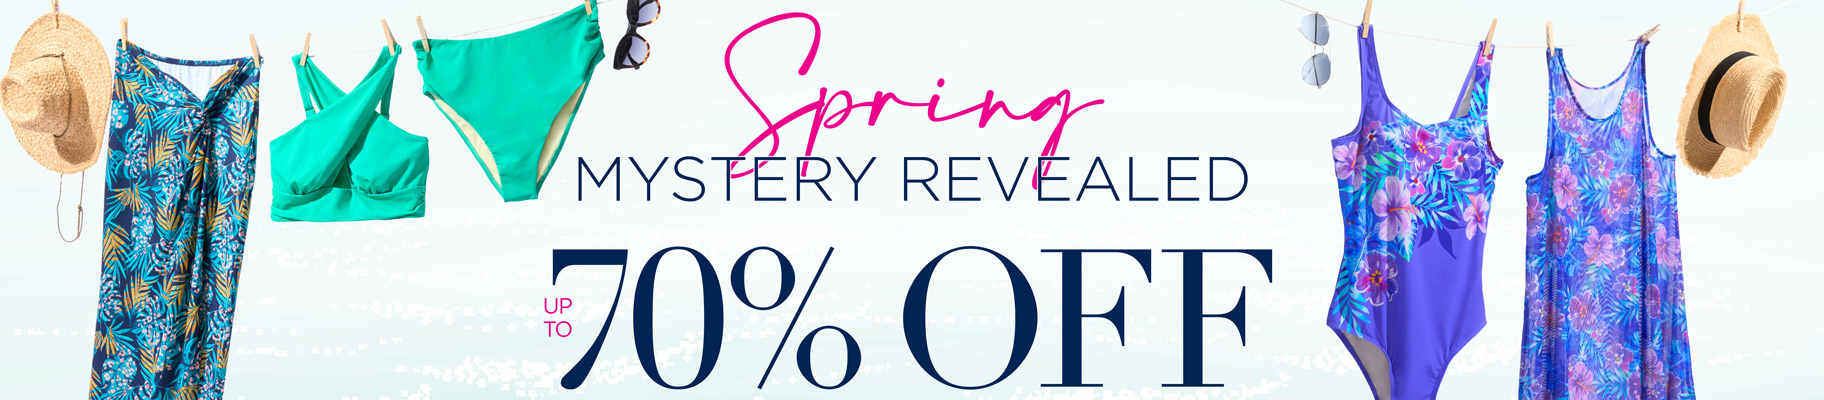 Spring Gift Shop - up to 70% OFF